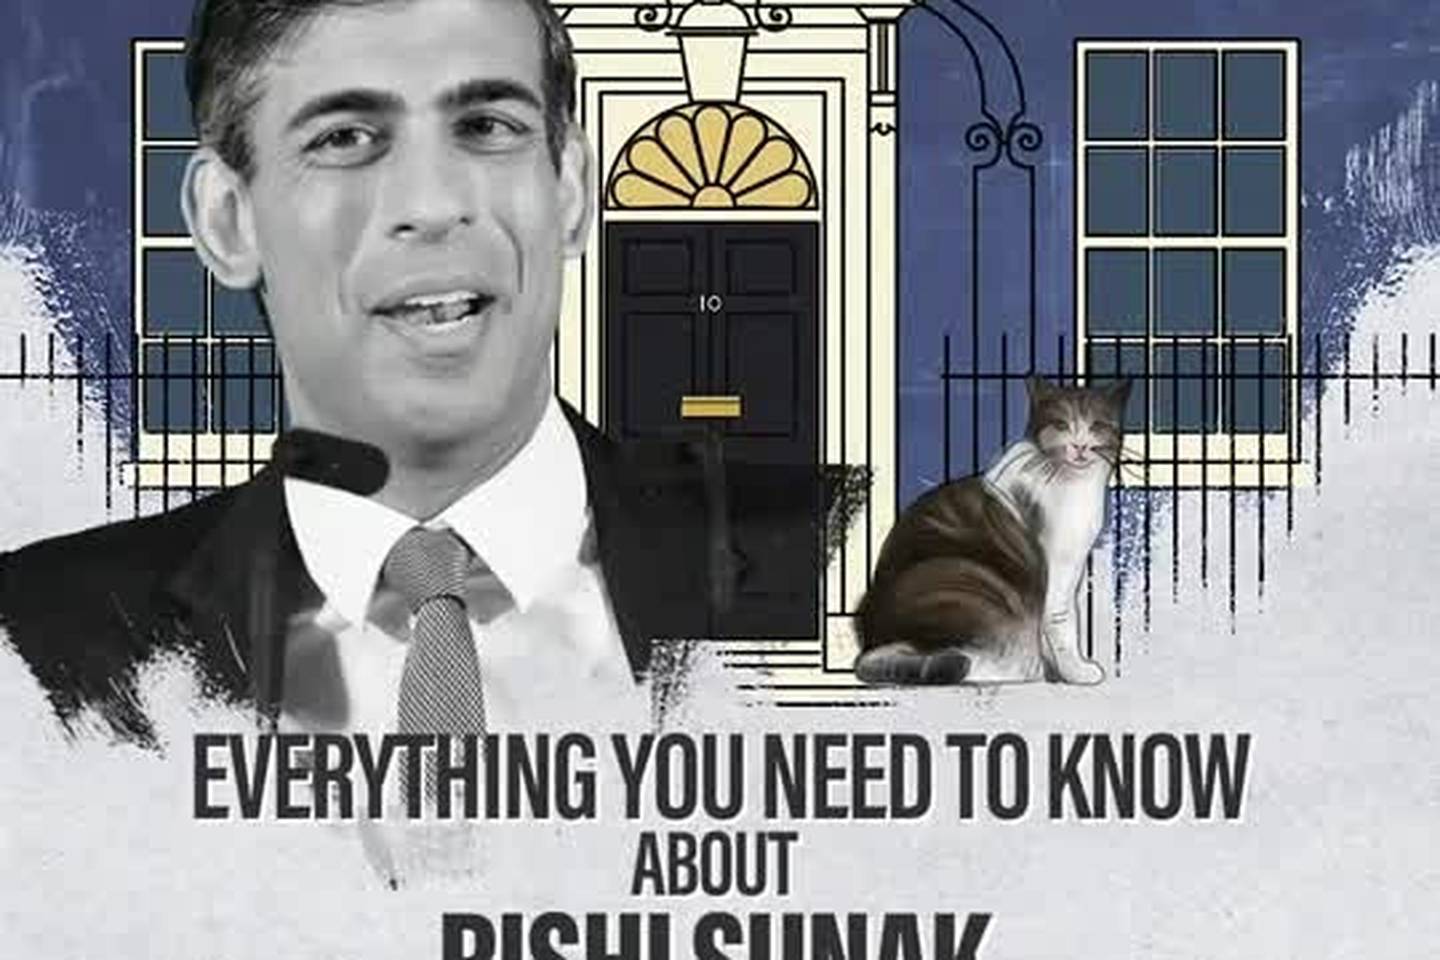 Everything you need to know about Rishi Sunak